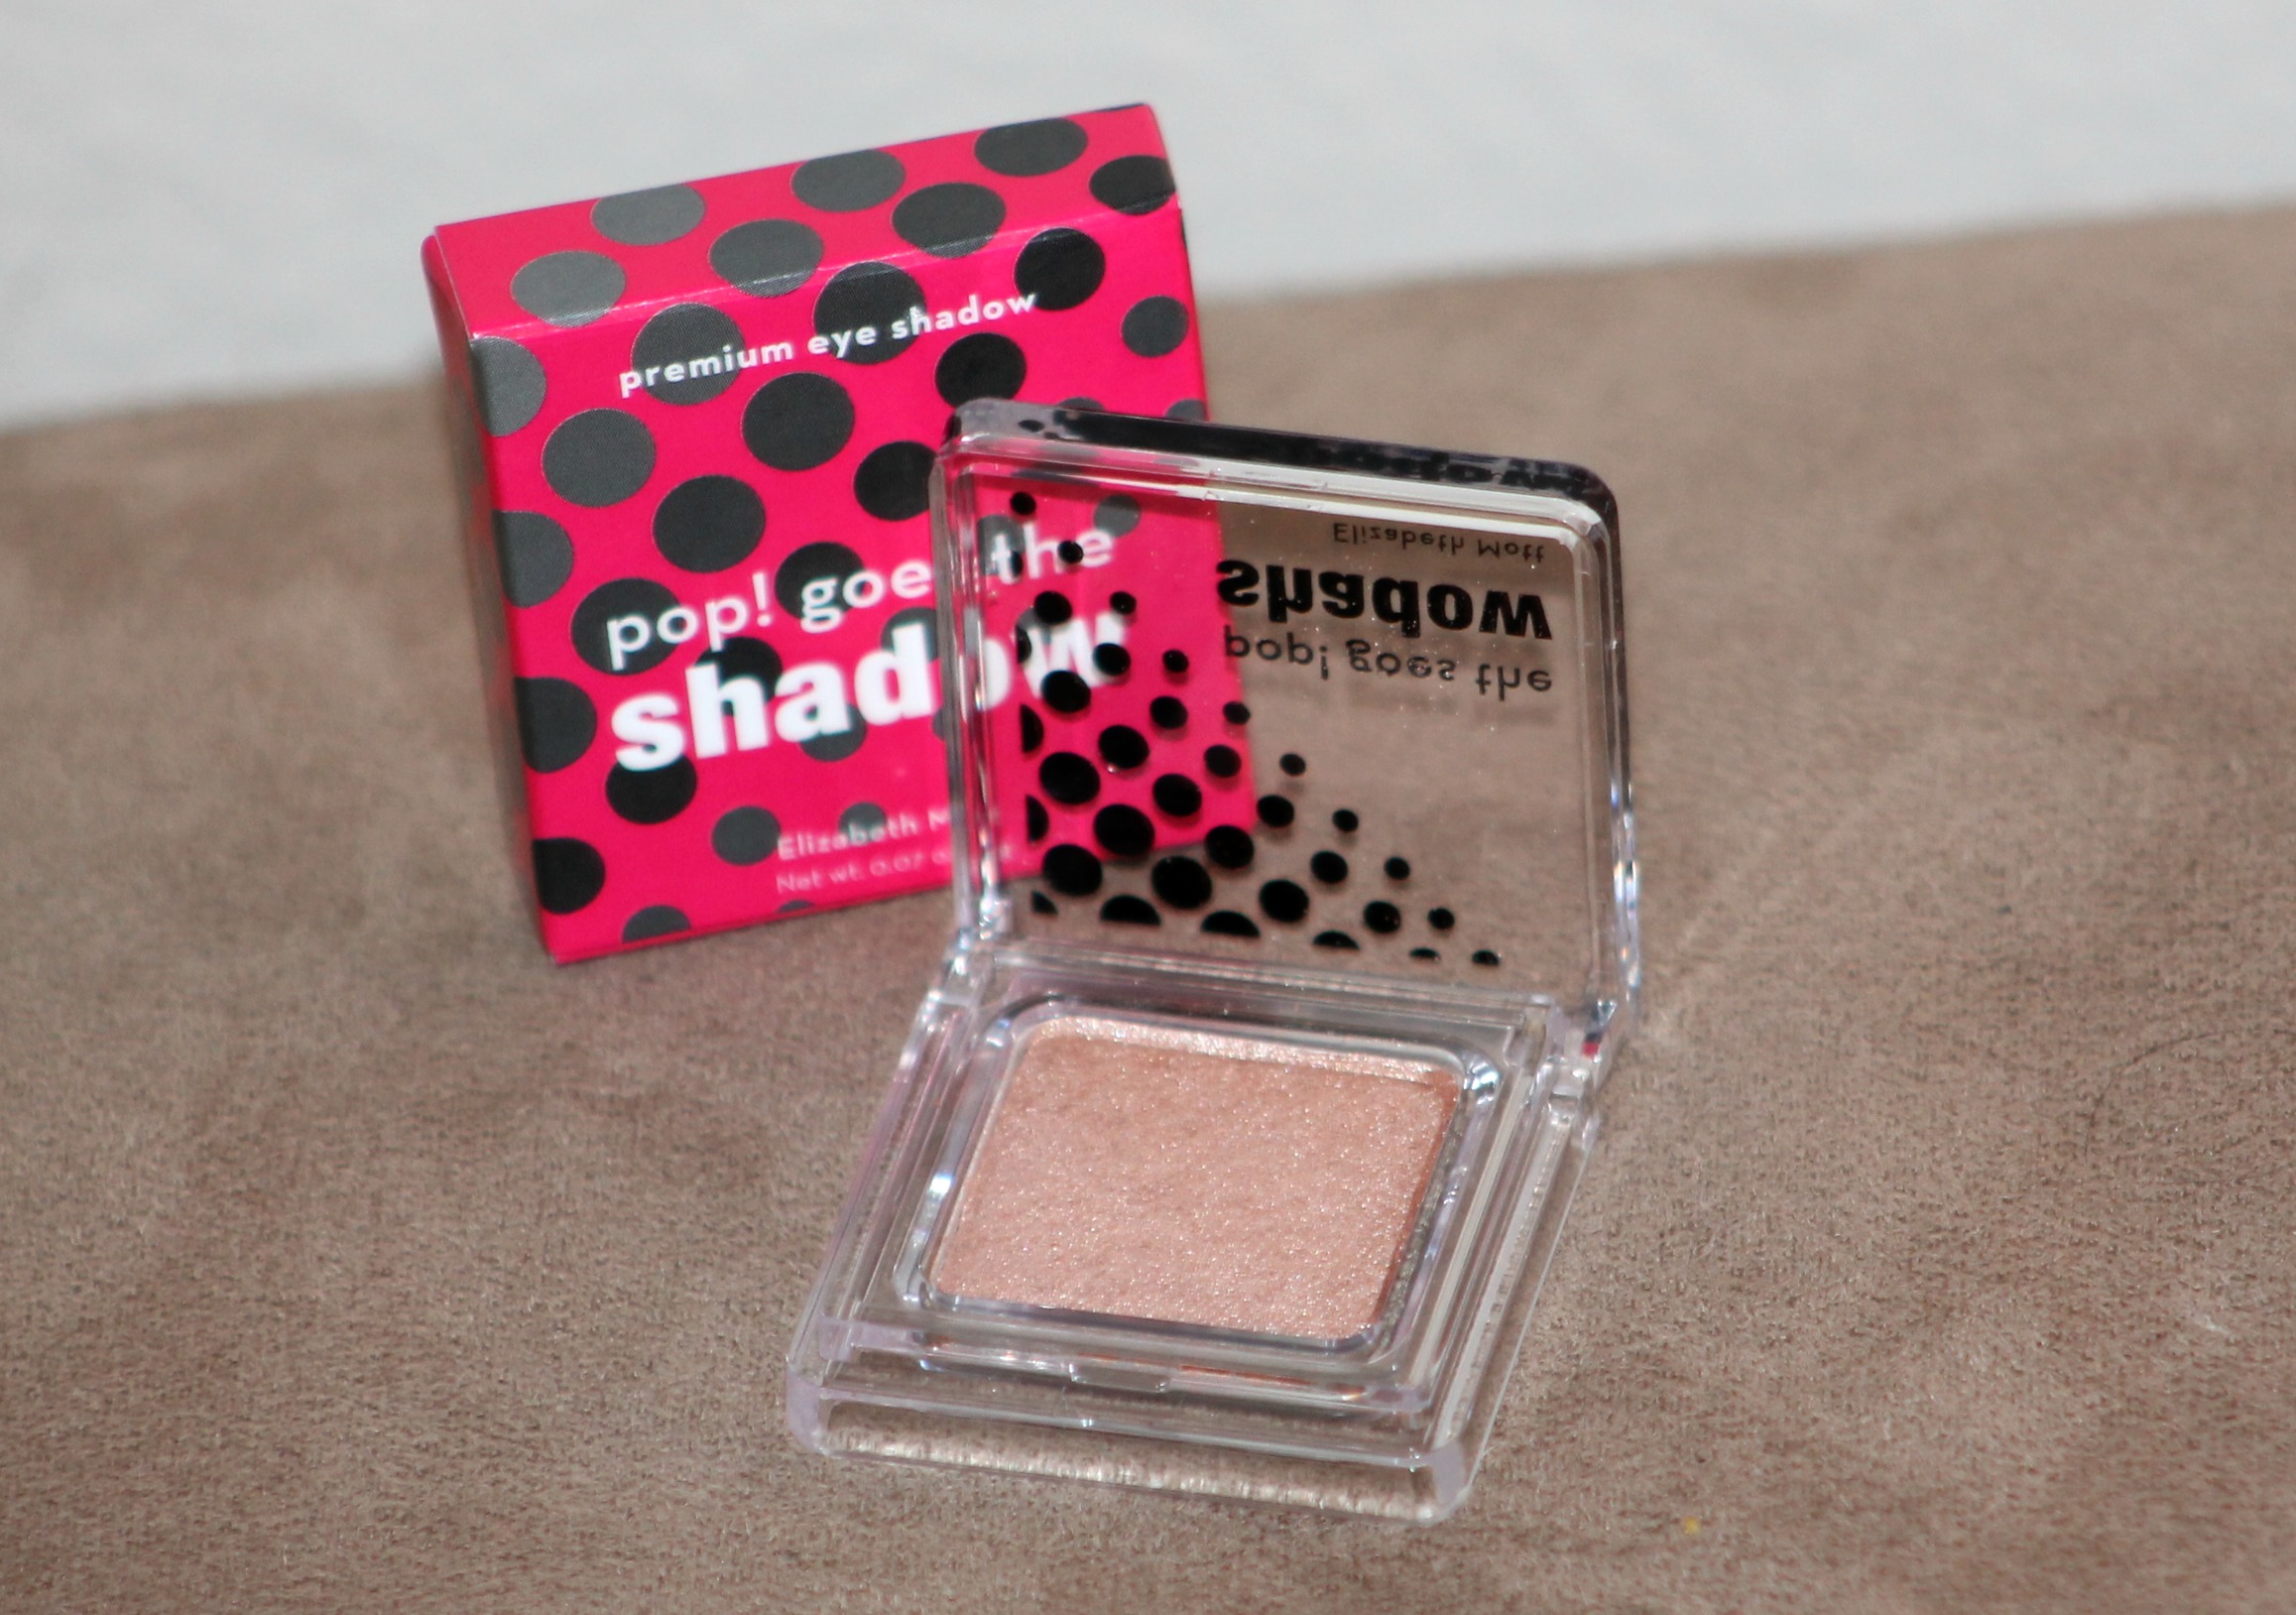 Pop! Goes the Shadow in Champagne Ipsy Glam Bag April 2014